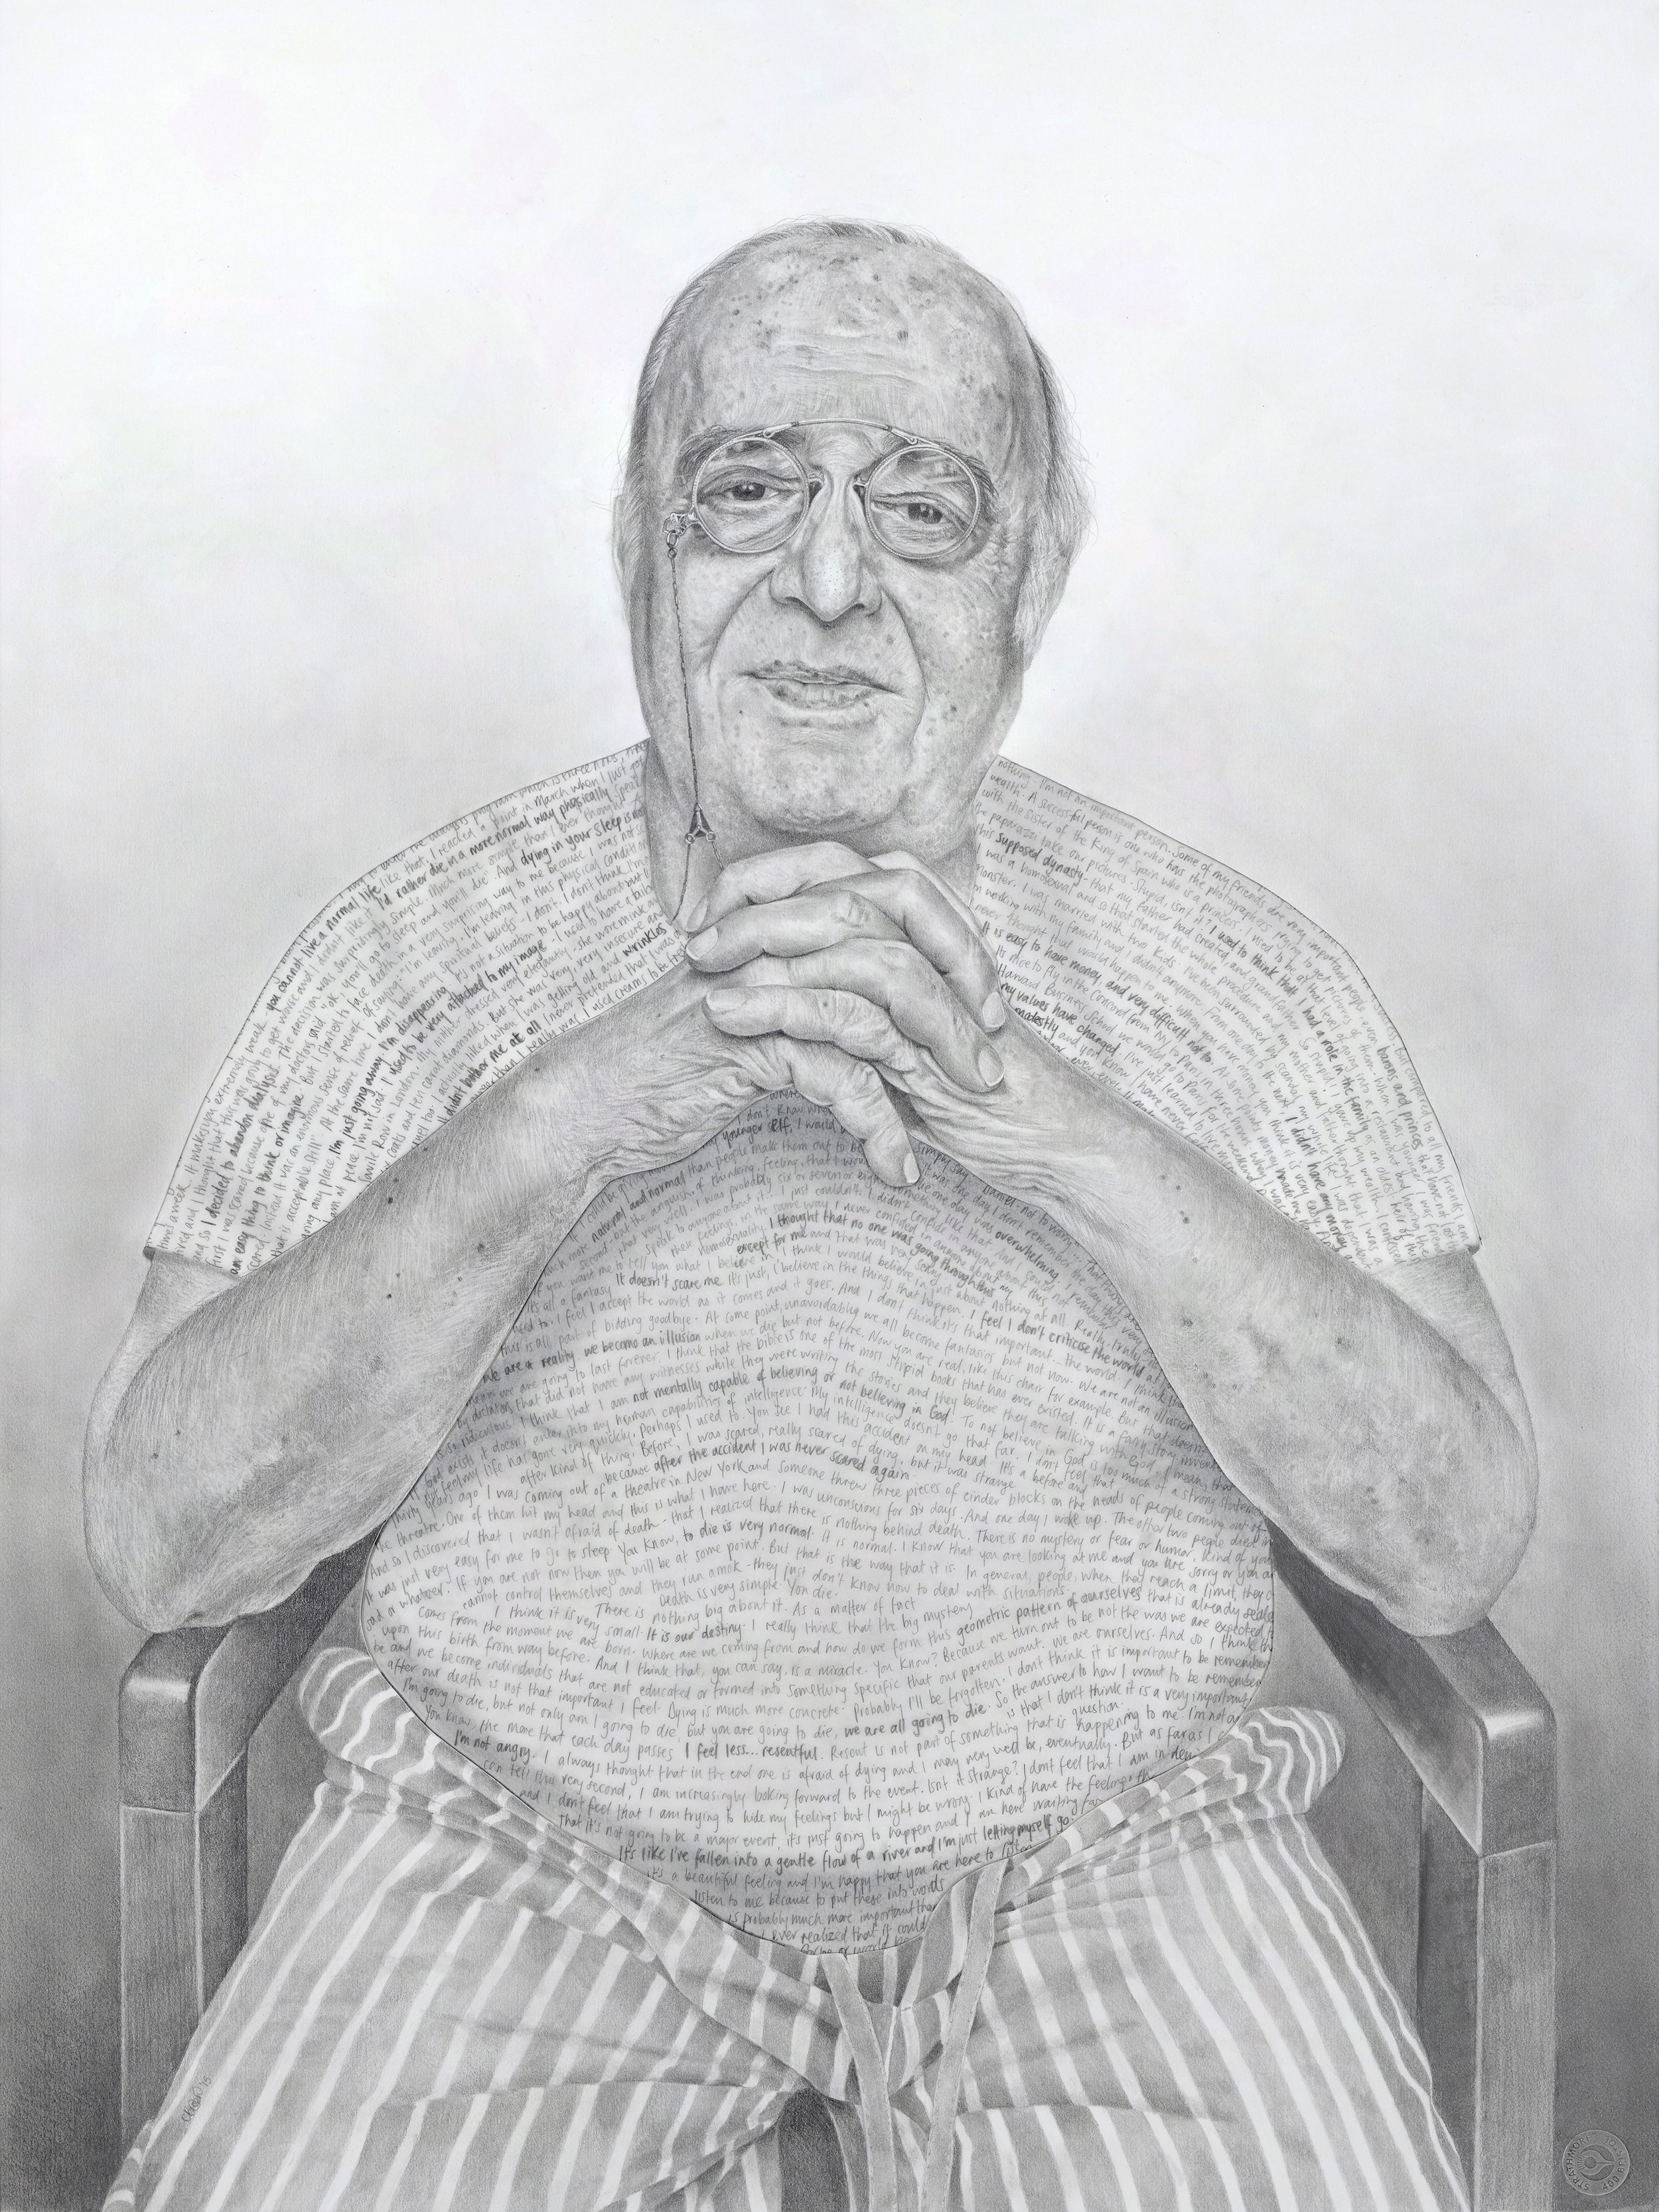 Daniel - Pencil on drawing and tissue papers - 30" x 22" - 2015